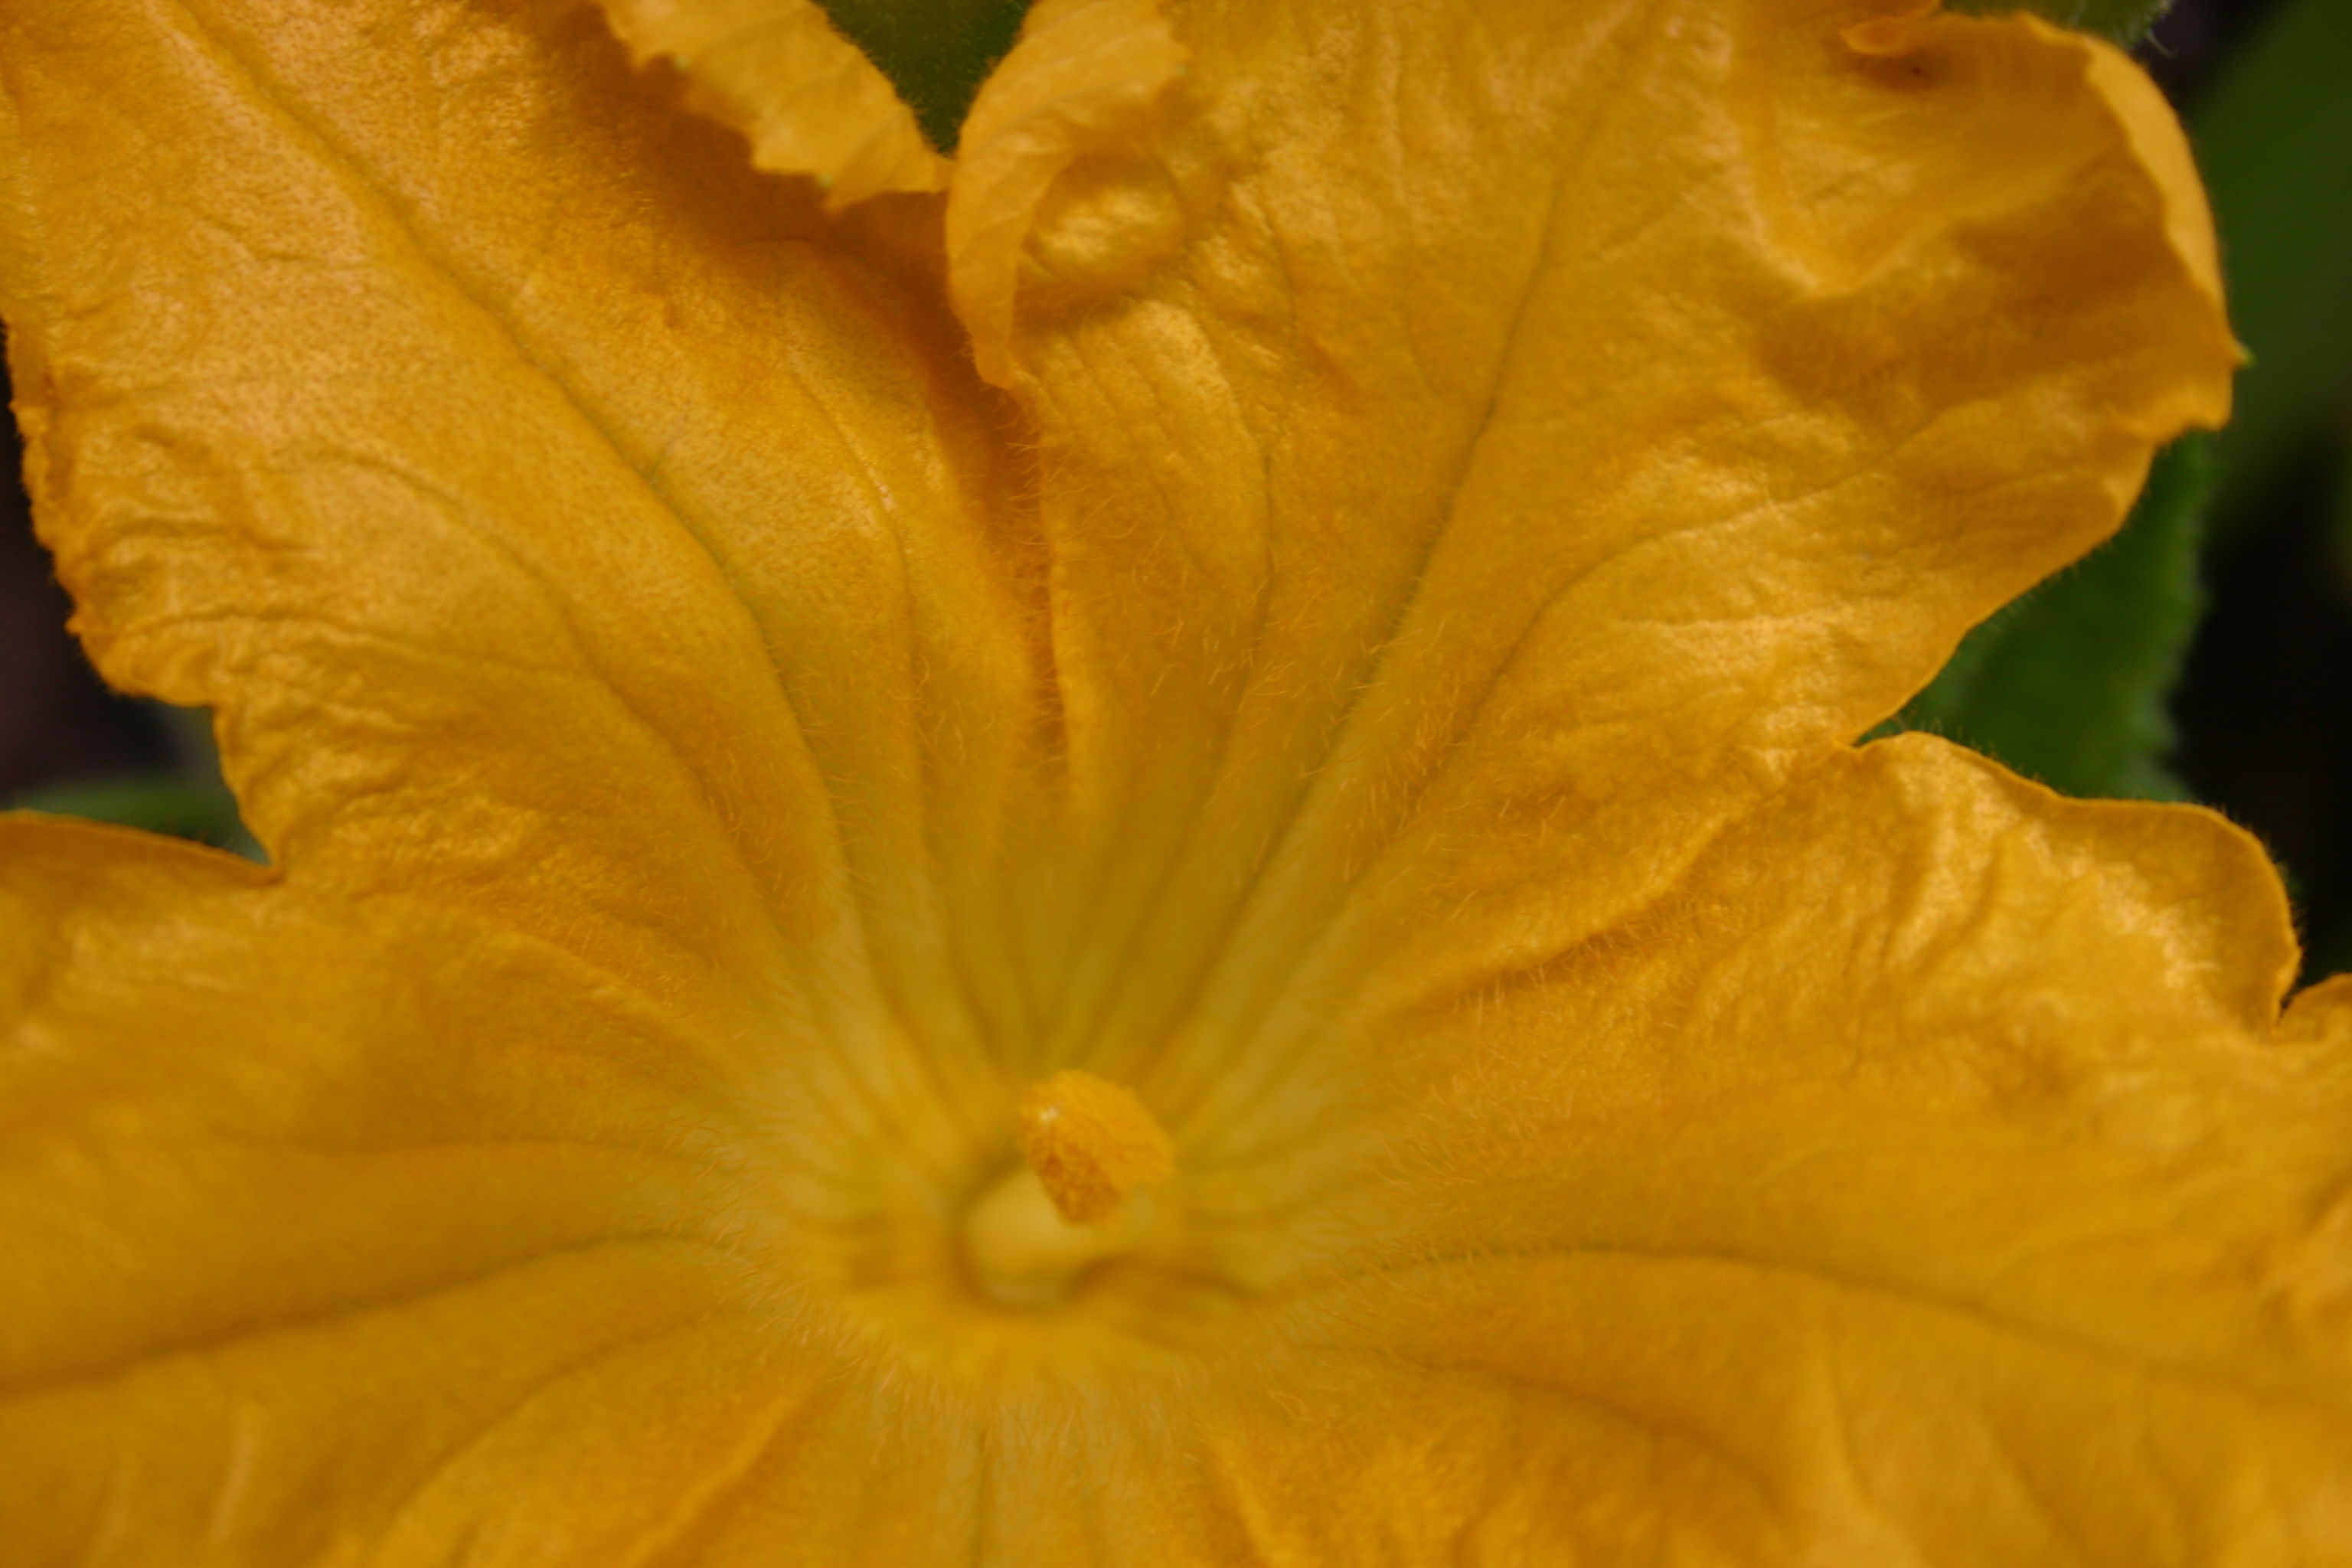 Giant yellow flower on a zucchini plant.